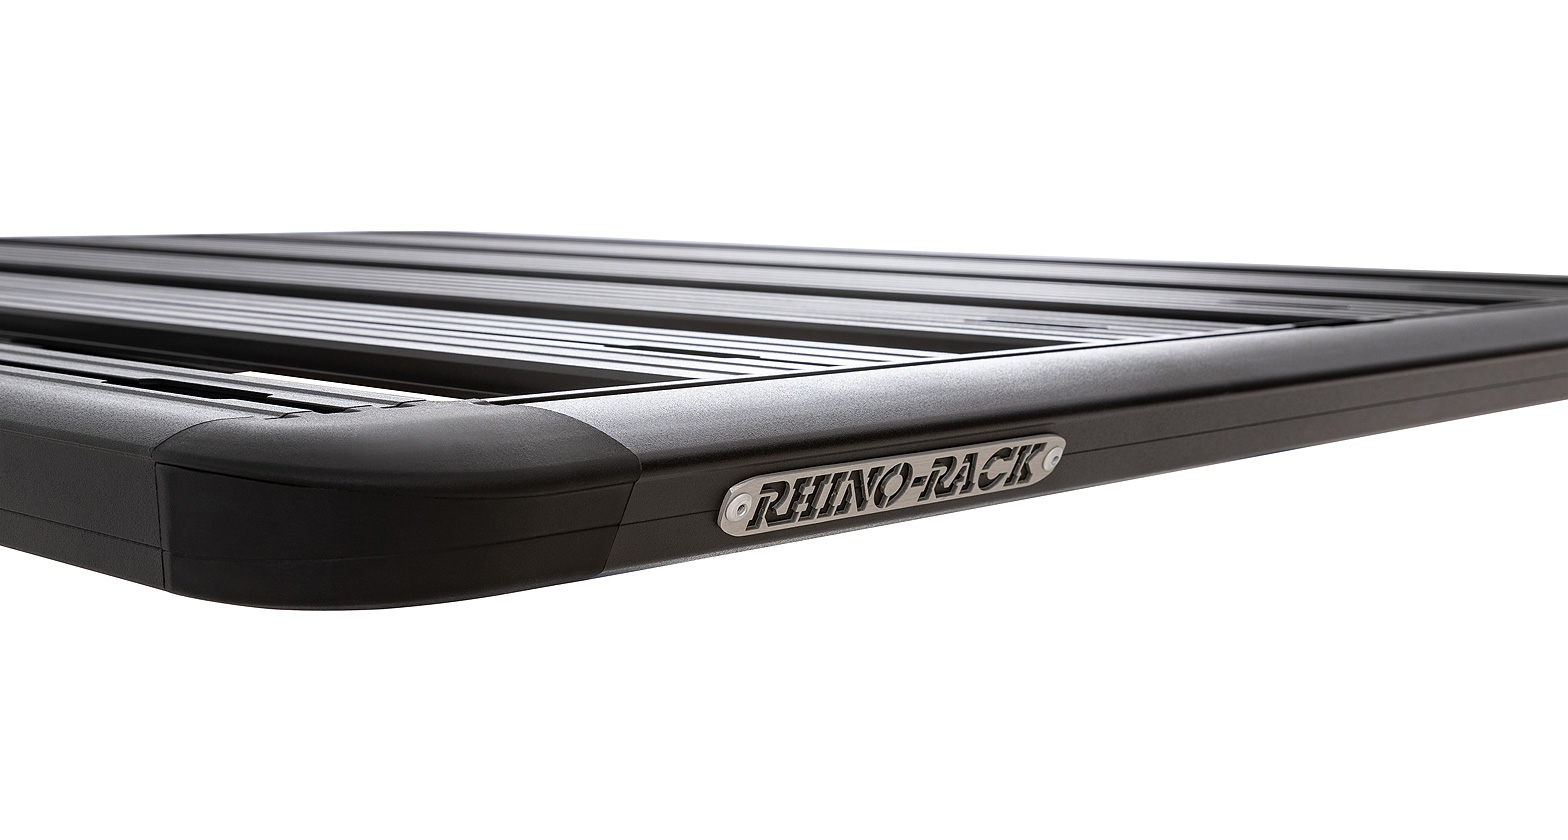 Rhino Rack JB1720 Pioneer Platform (1528mm x 1236mm) with Backbone for Toyota Hilux N70 4dr Ute with Bare Roof (2005 to 2015) - Track Mount